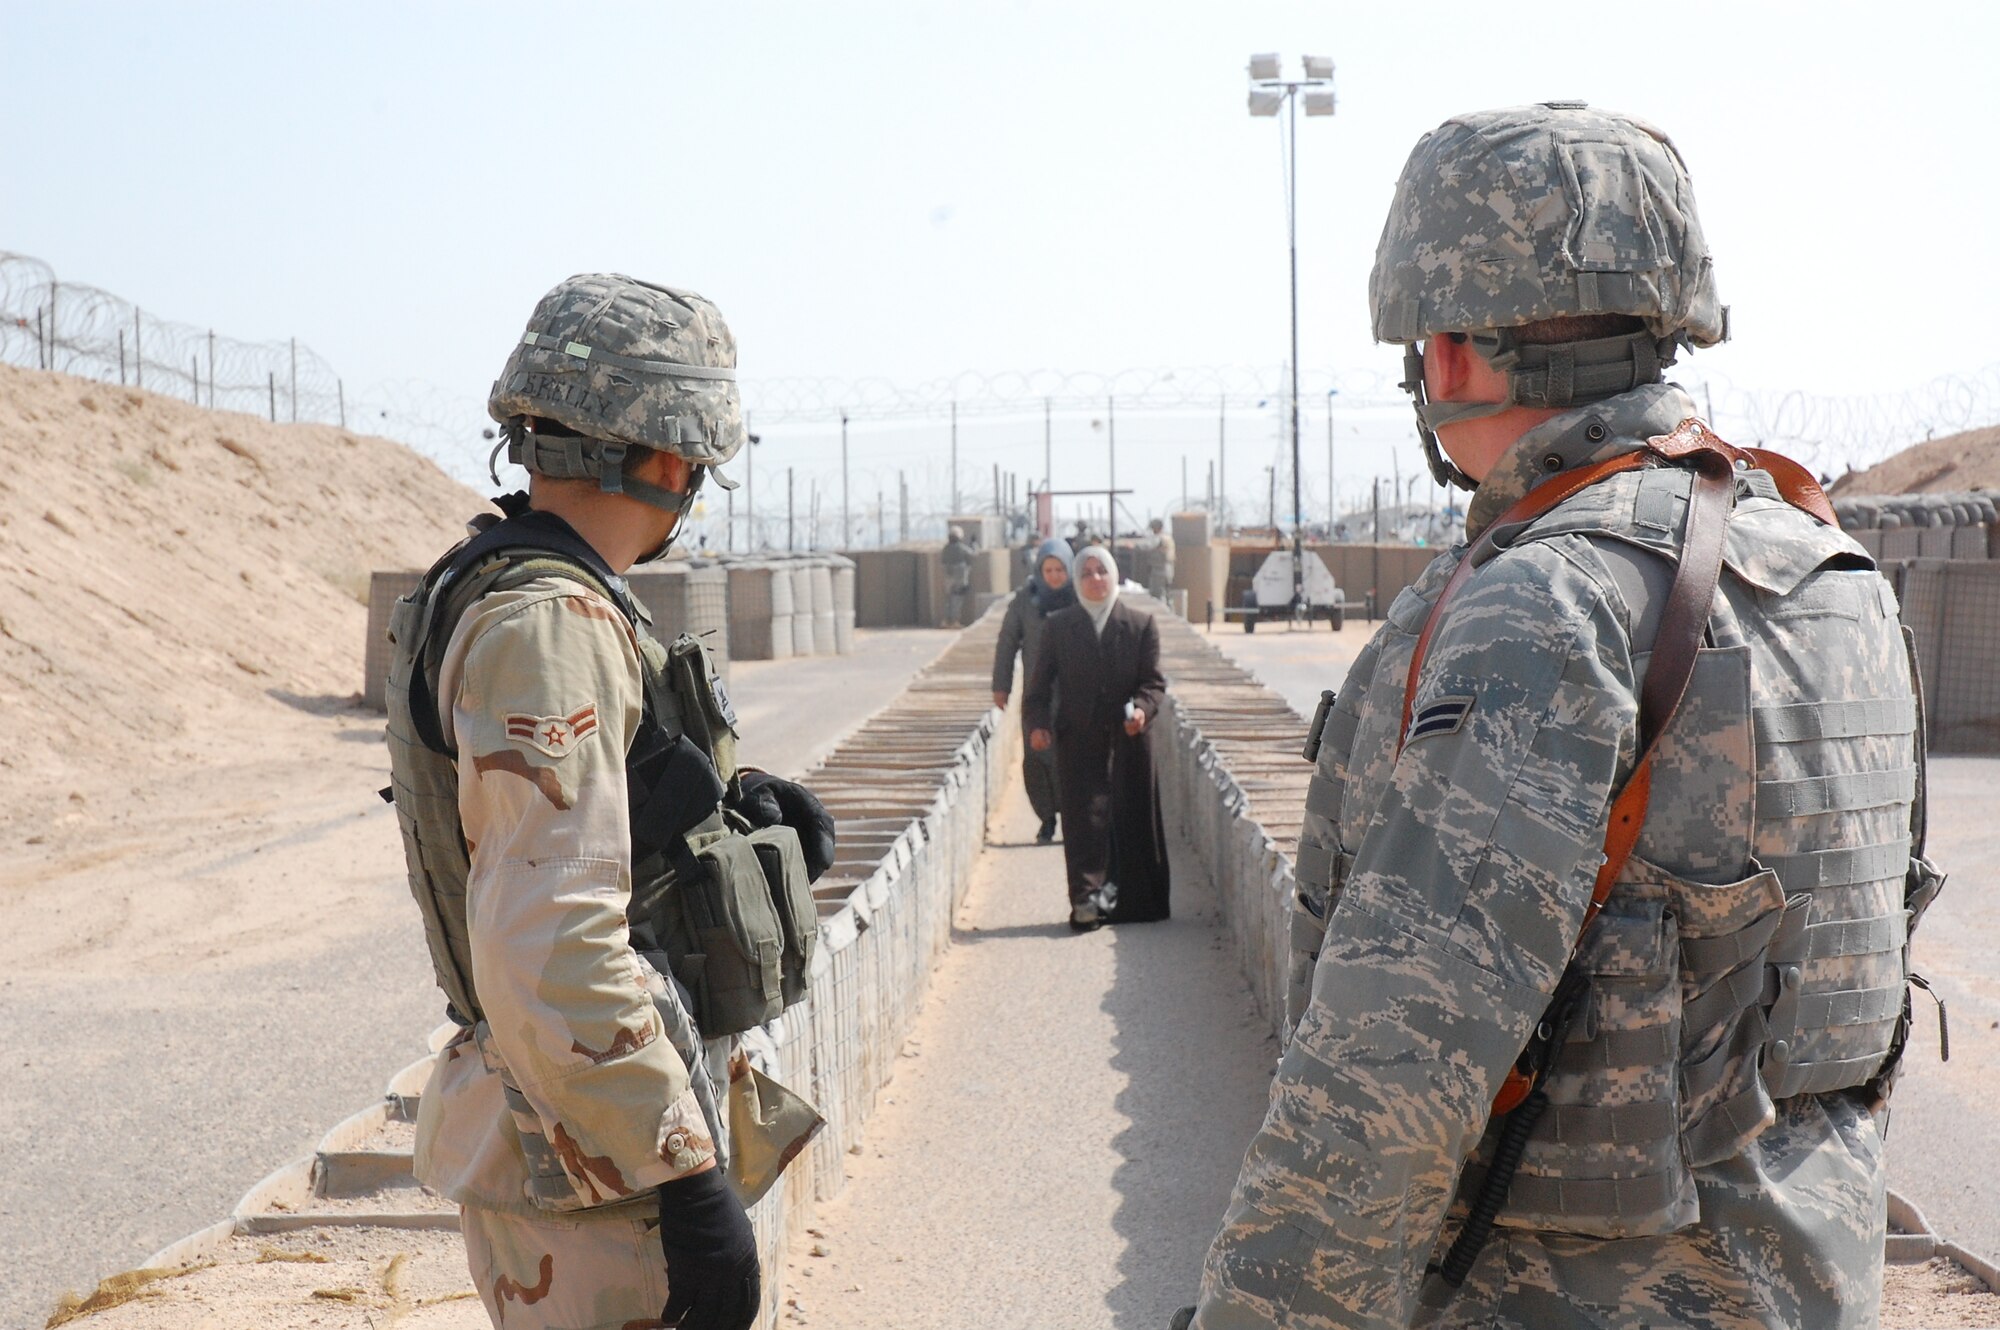 CAMP BUCCA, Iraq – Airman 1st Class Shane Kelly, left, and Airman 1st Class Russ Stiegemeier, both assigned to the 886th Expeditionary Security Forces Squadron, prepare to process Iraqis visiting family members detained in the Theater Internment Facility in Camp Bucca, Iraq, Feb 10, 2008.  Airmen deployed to the 886th ESFS operate the TIF’s vigorous visitation program which houses detainees determined to be a security threat against Iraqi citizens or coalition forces. More than 1,700 friends and family members visit the detainees each week. Airman Kelly is deployed from Hickam Air Force Base, Hawaii and Airman Stiegemeier is deployed from Malmstrom AFB, Mont. (U.S. Air Force Photo/Capt. Jason McCree)